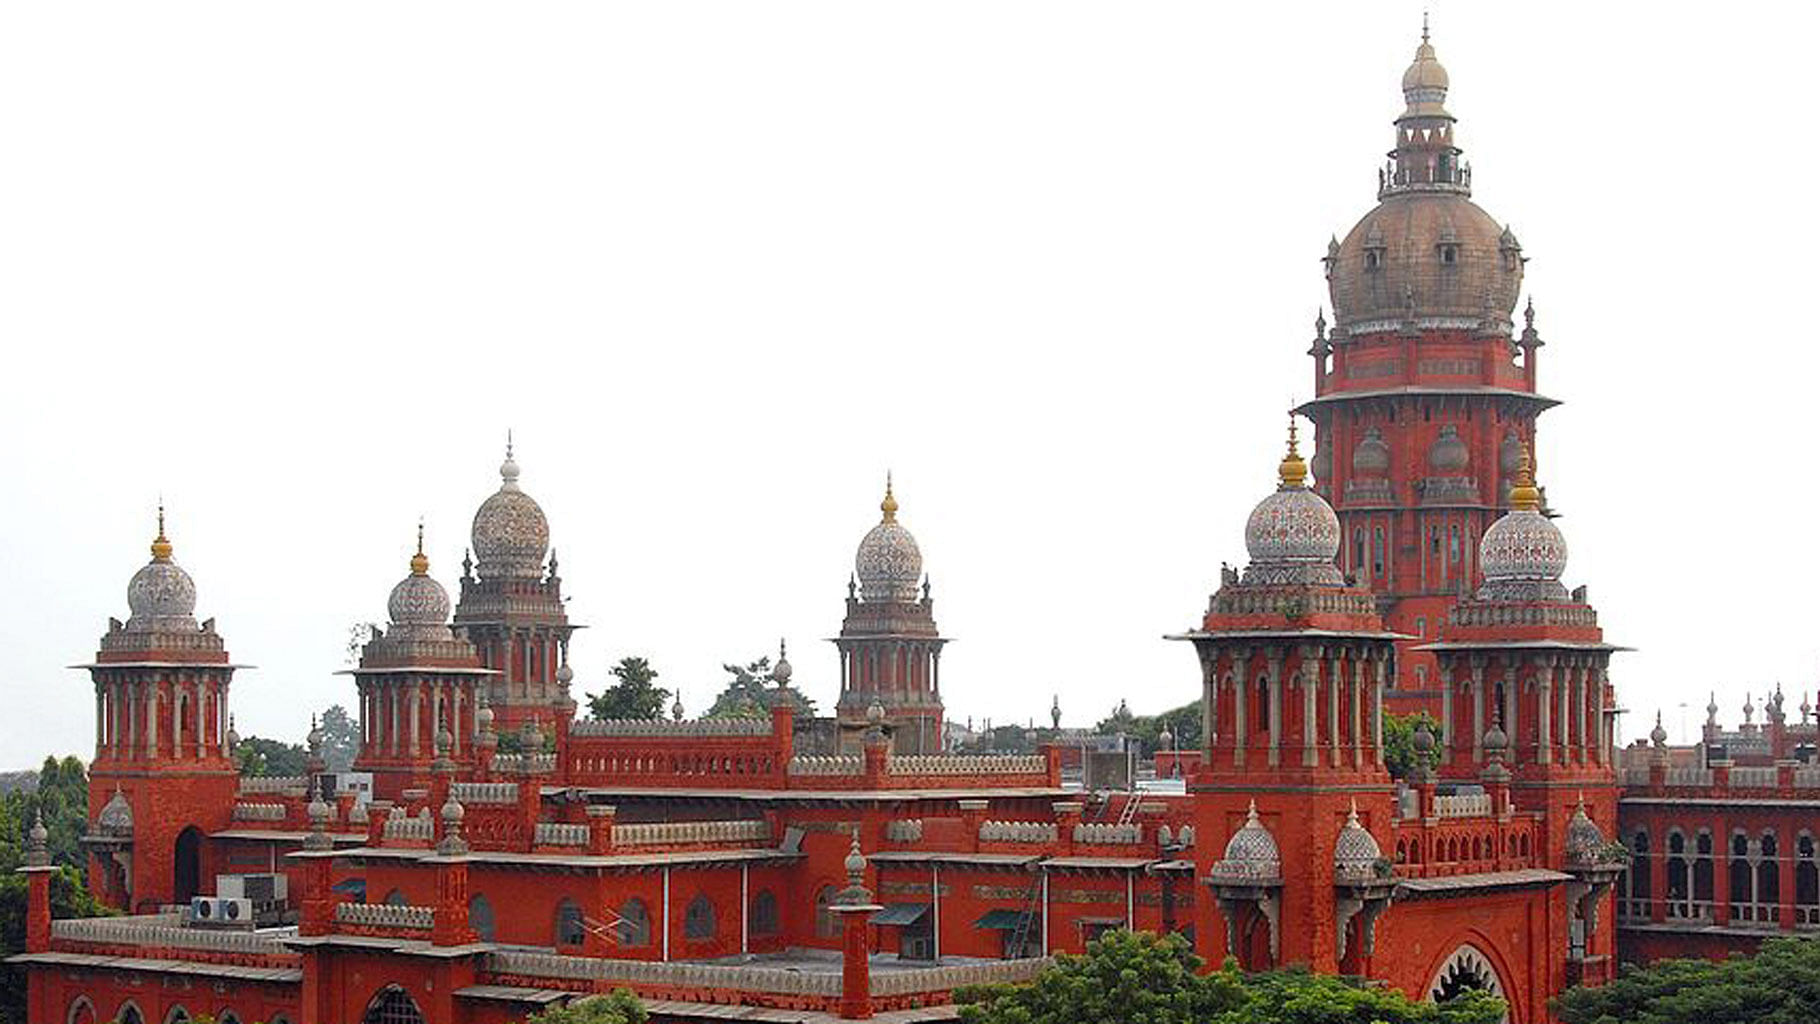 File photo of the Madras High Court. (Photo: The News Minute)